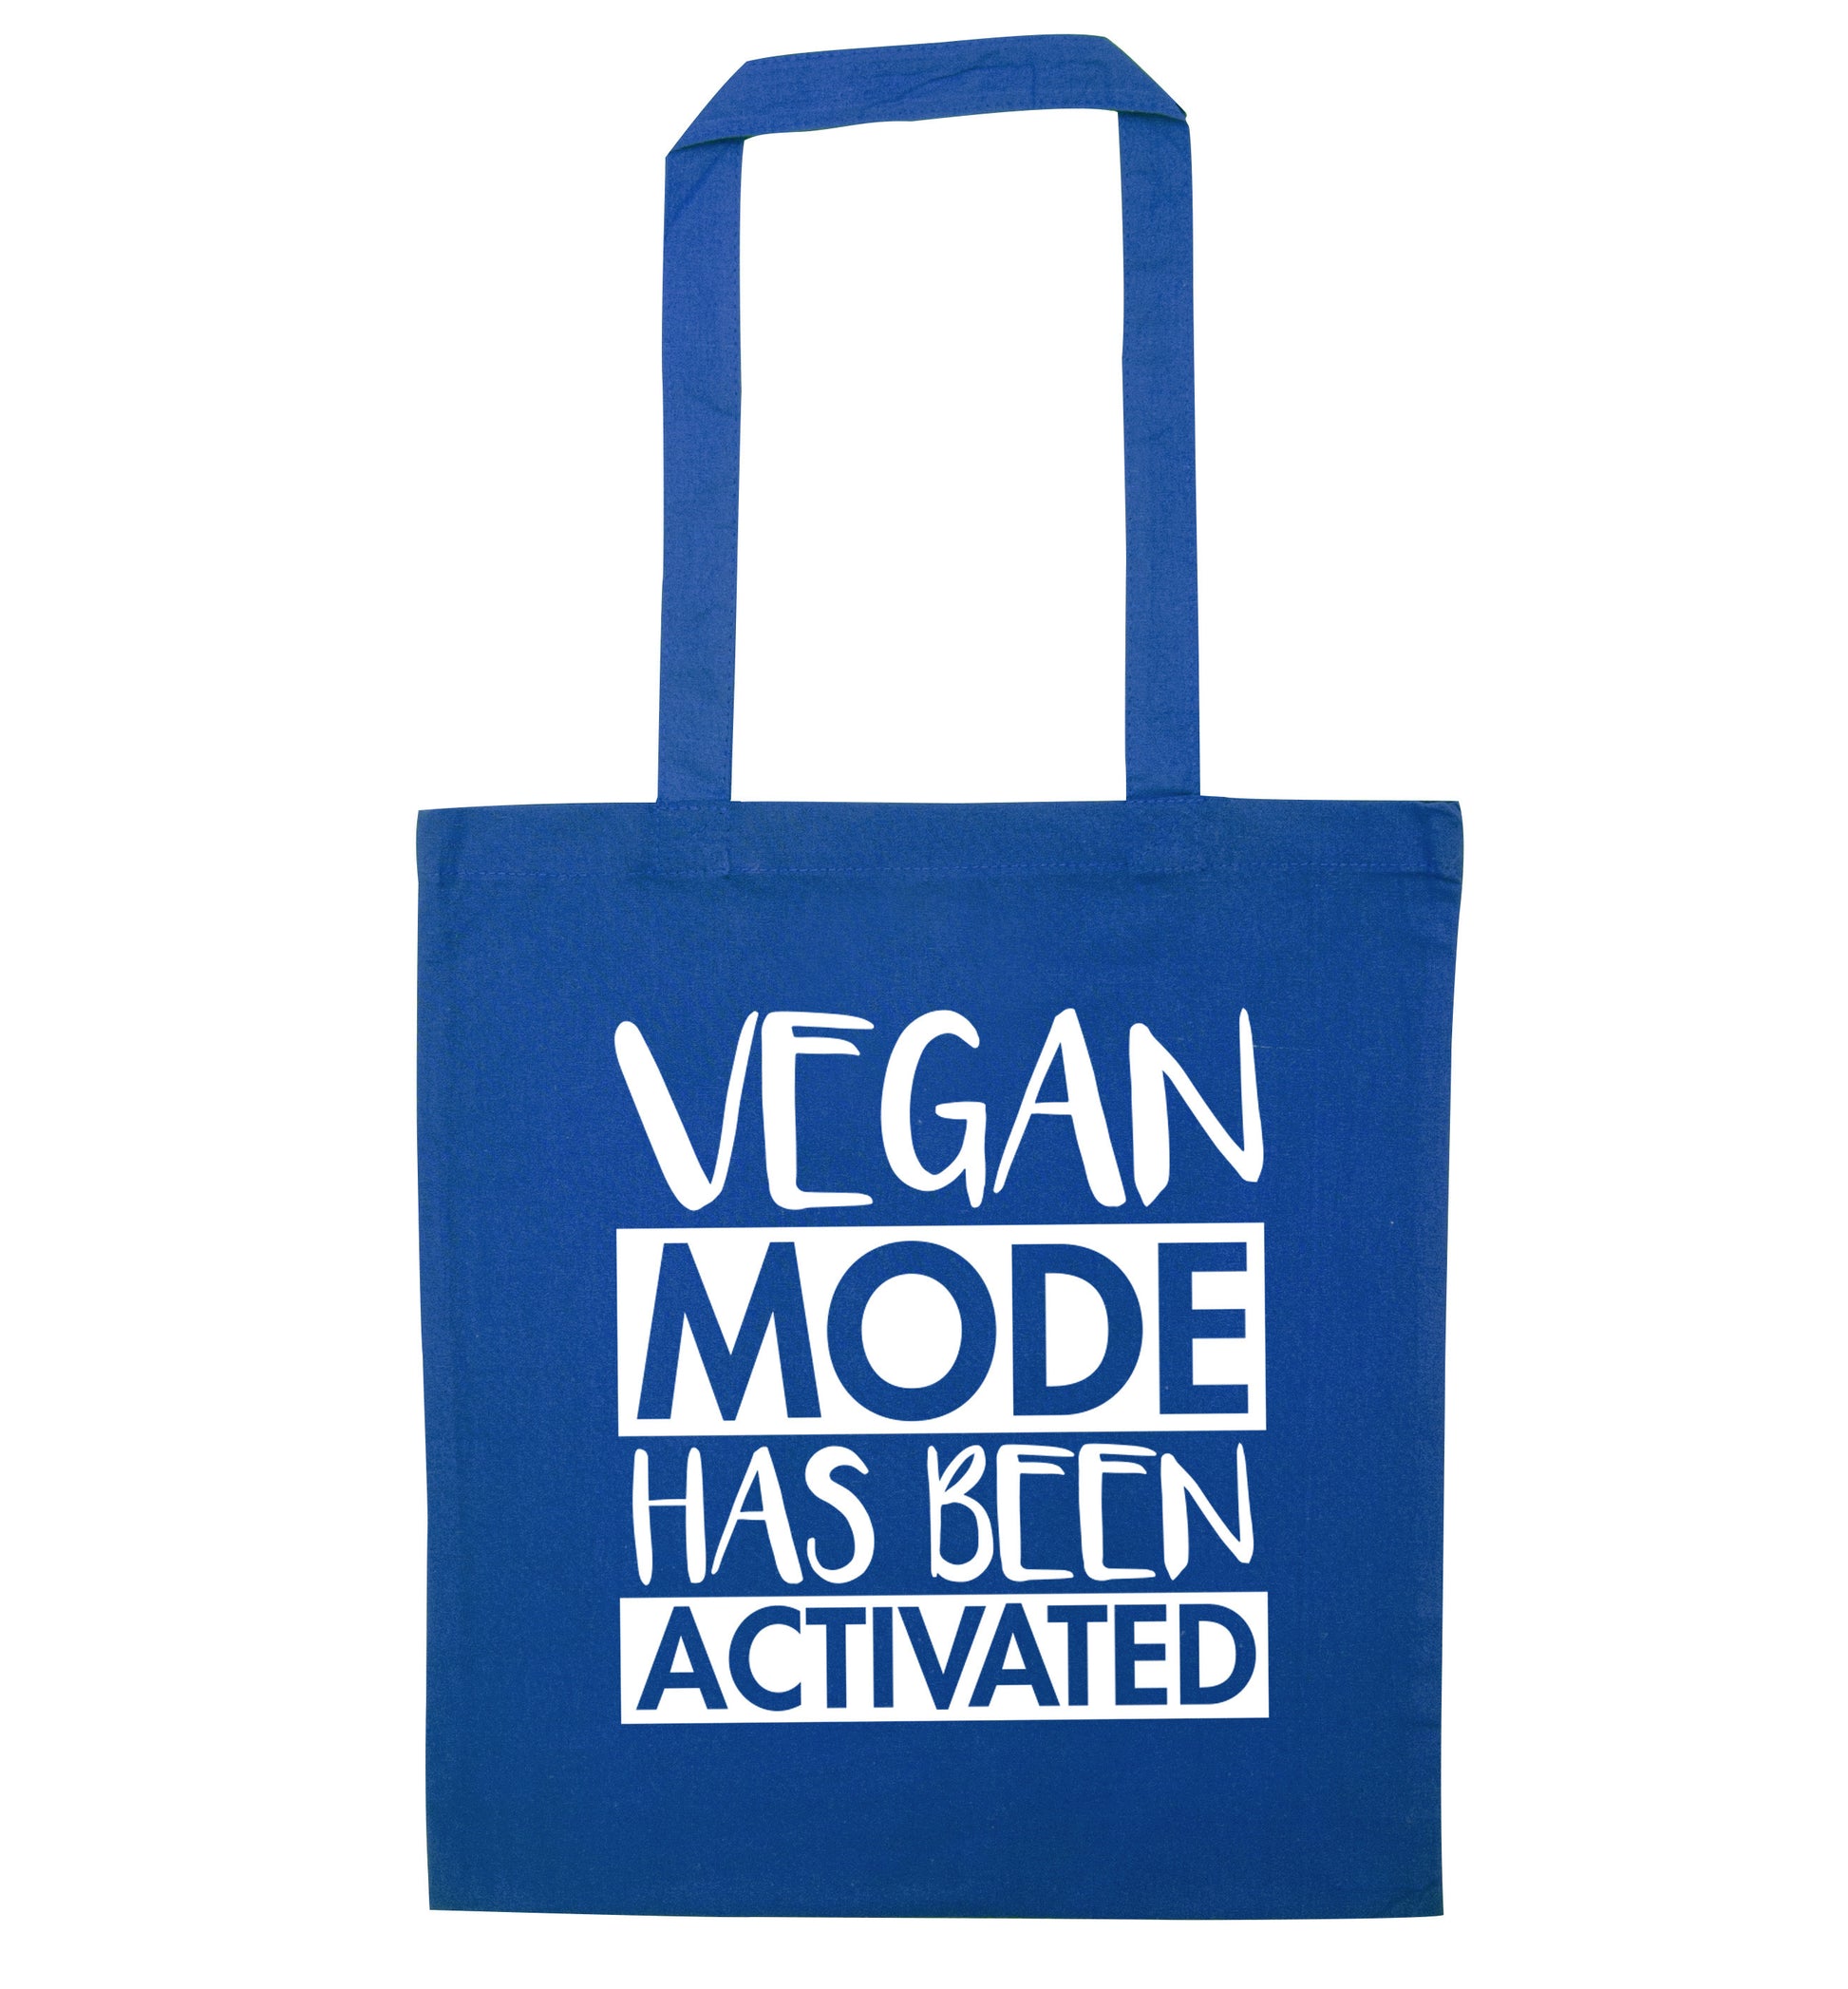 Vegan mode activated blue tote bag